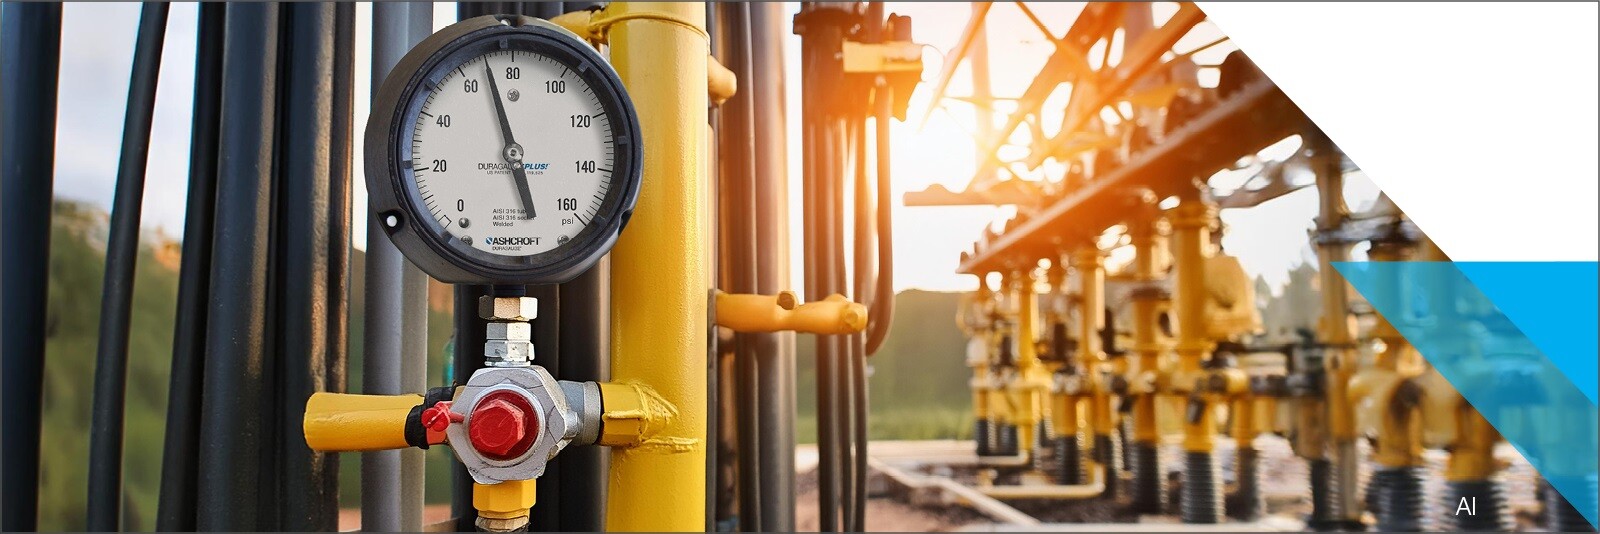 What are the Advantages of Ashcroft Pressure Gauges?